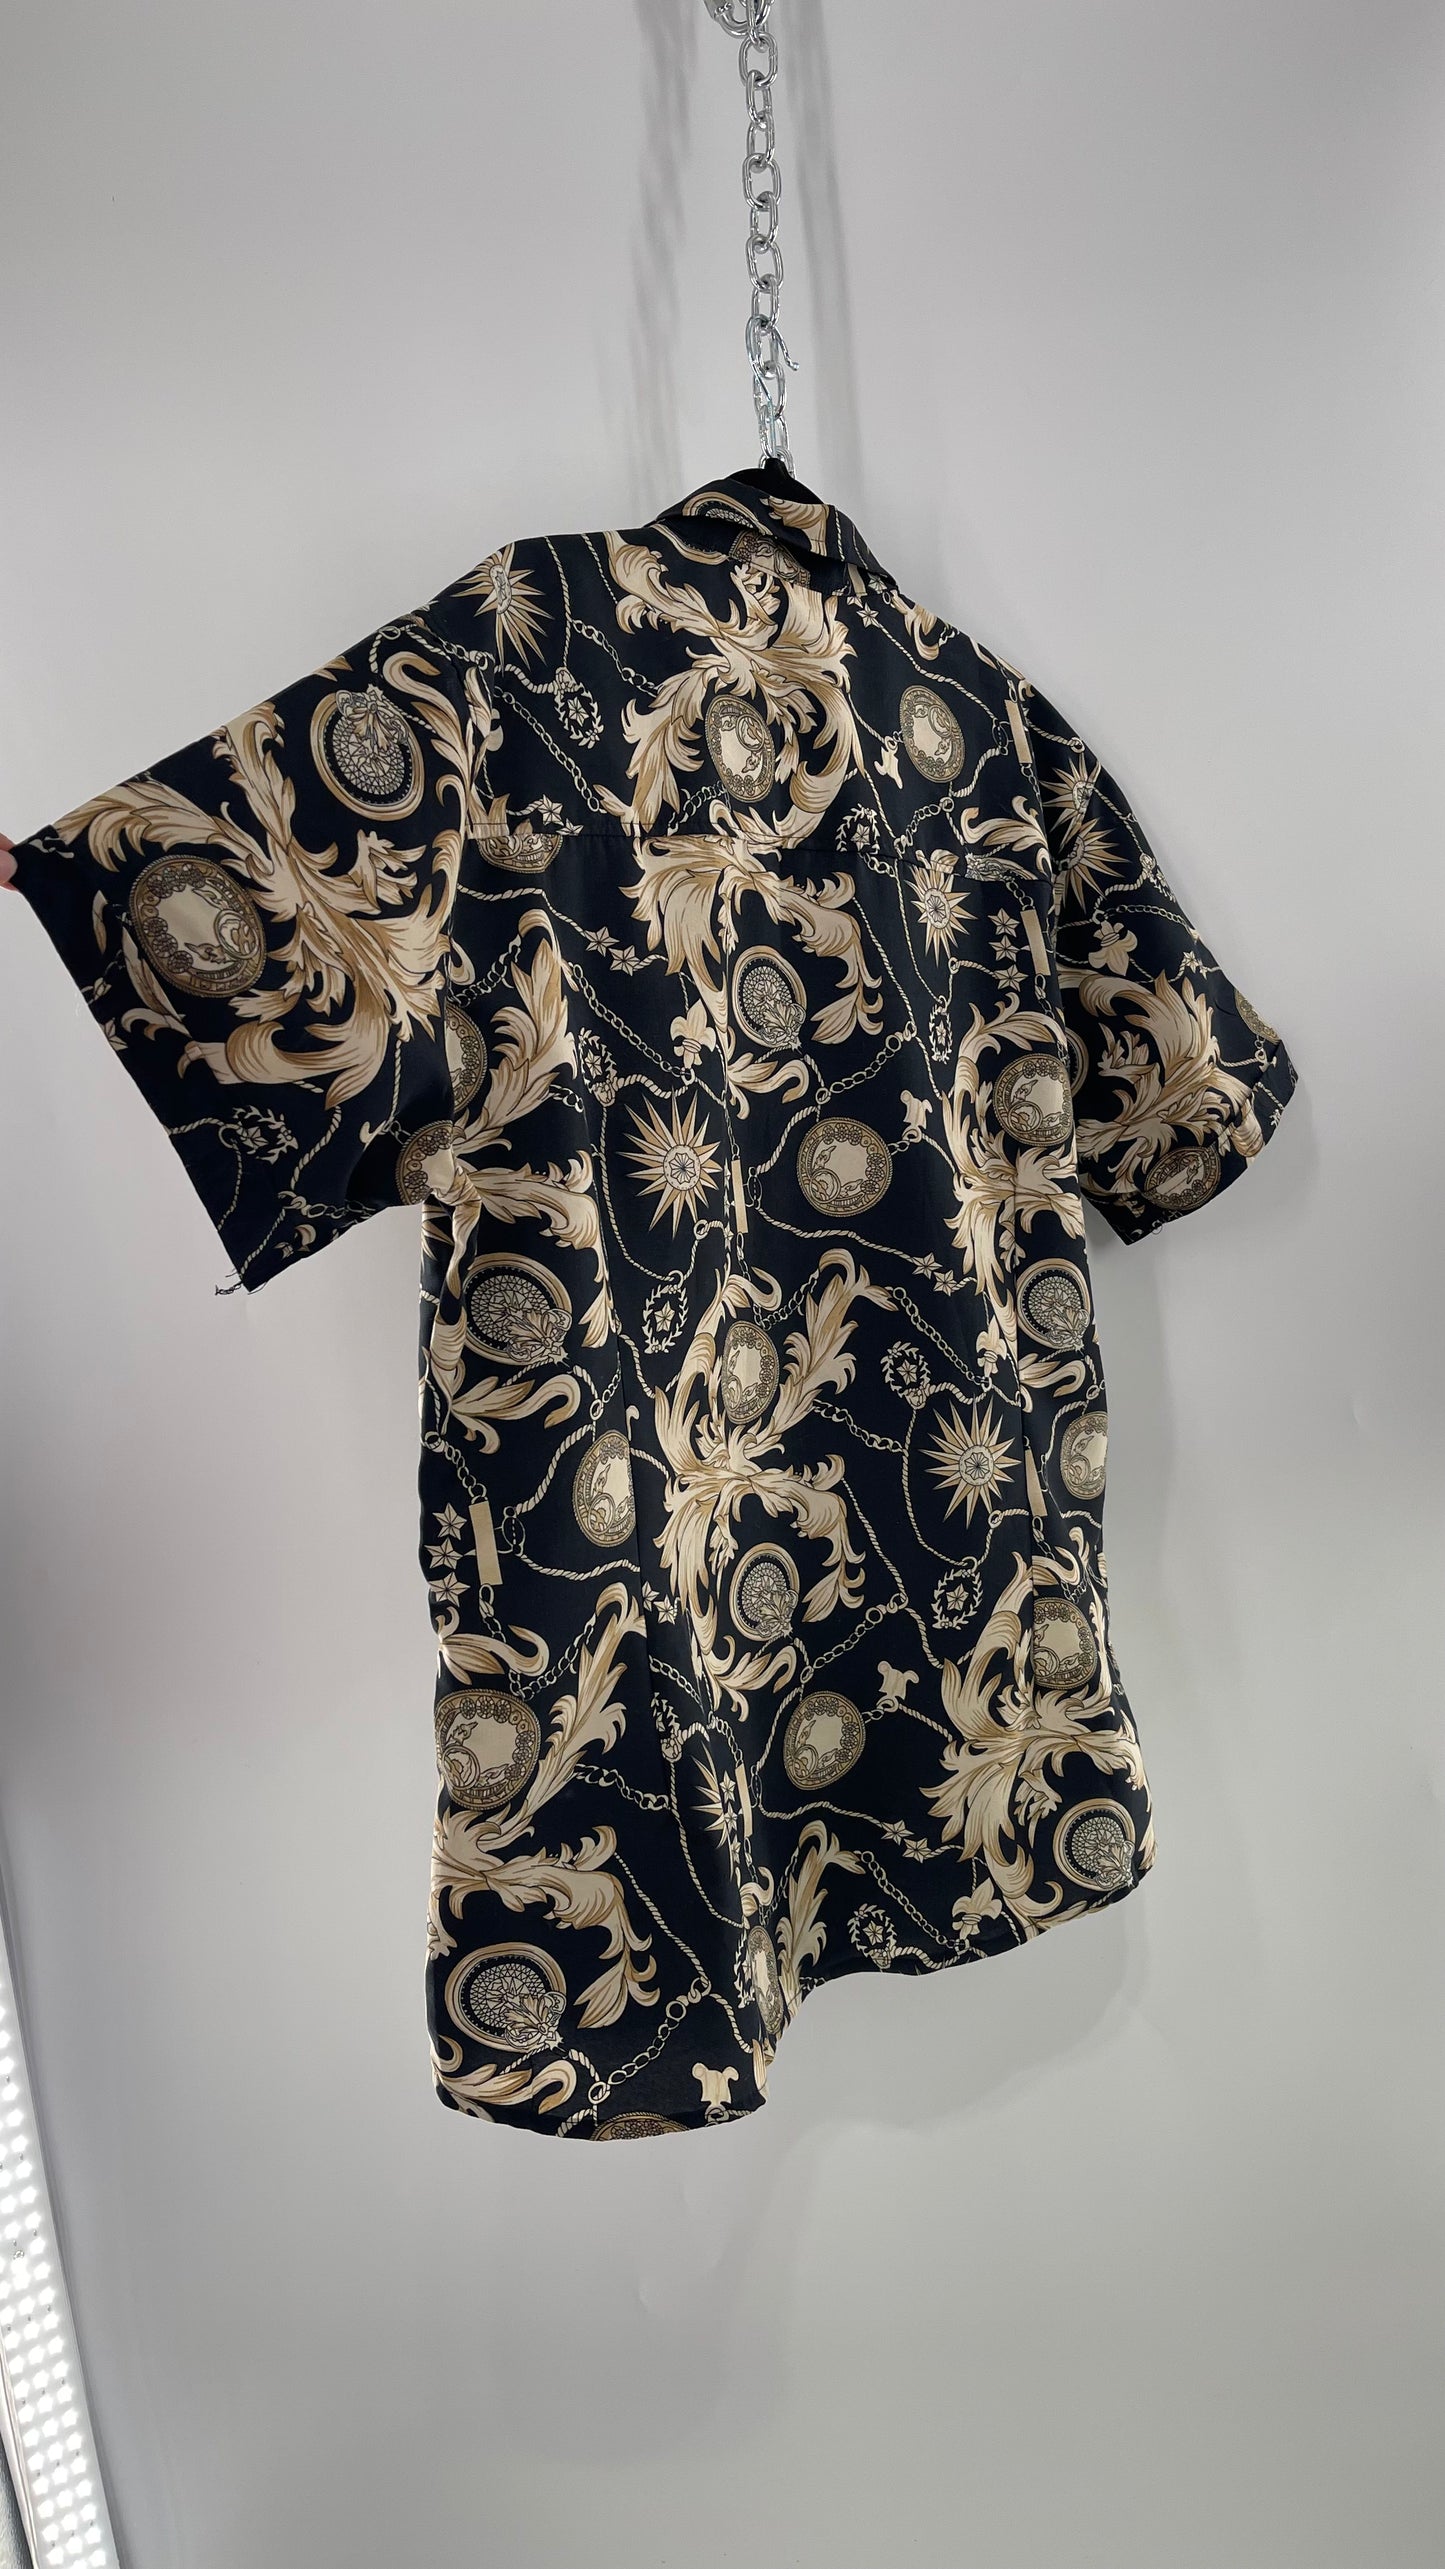 APTRO Black and Gold Brocade Short Sleeve Button Up with Tags (XXXL)